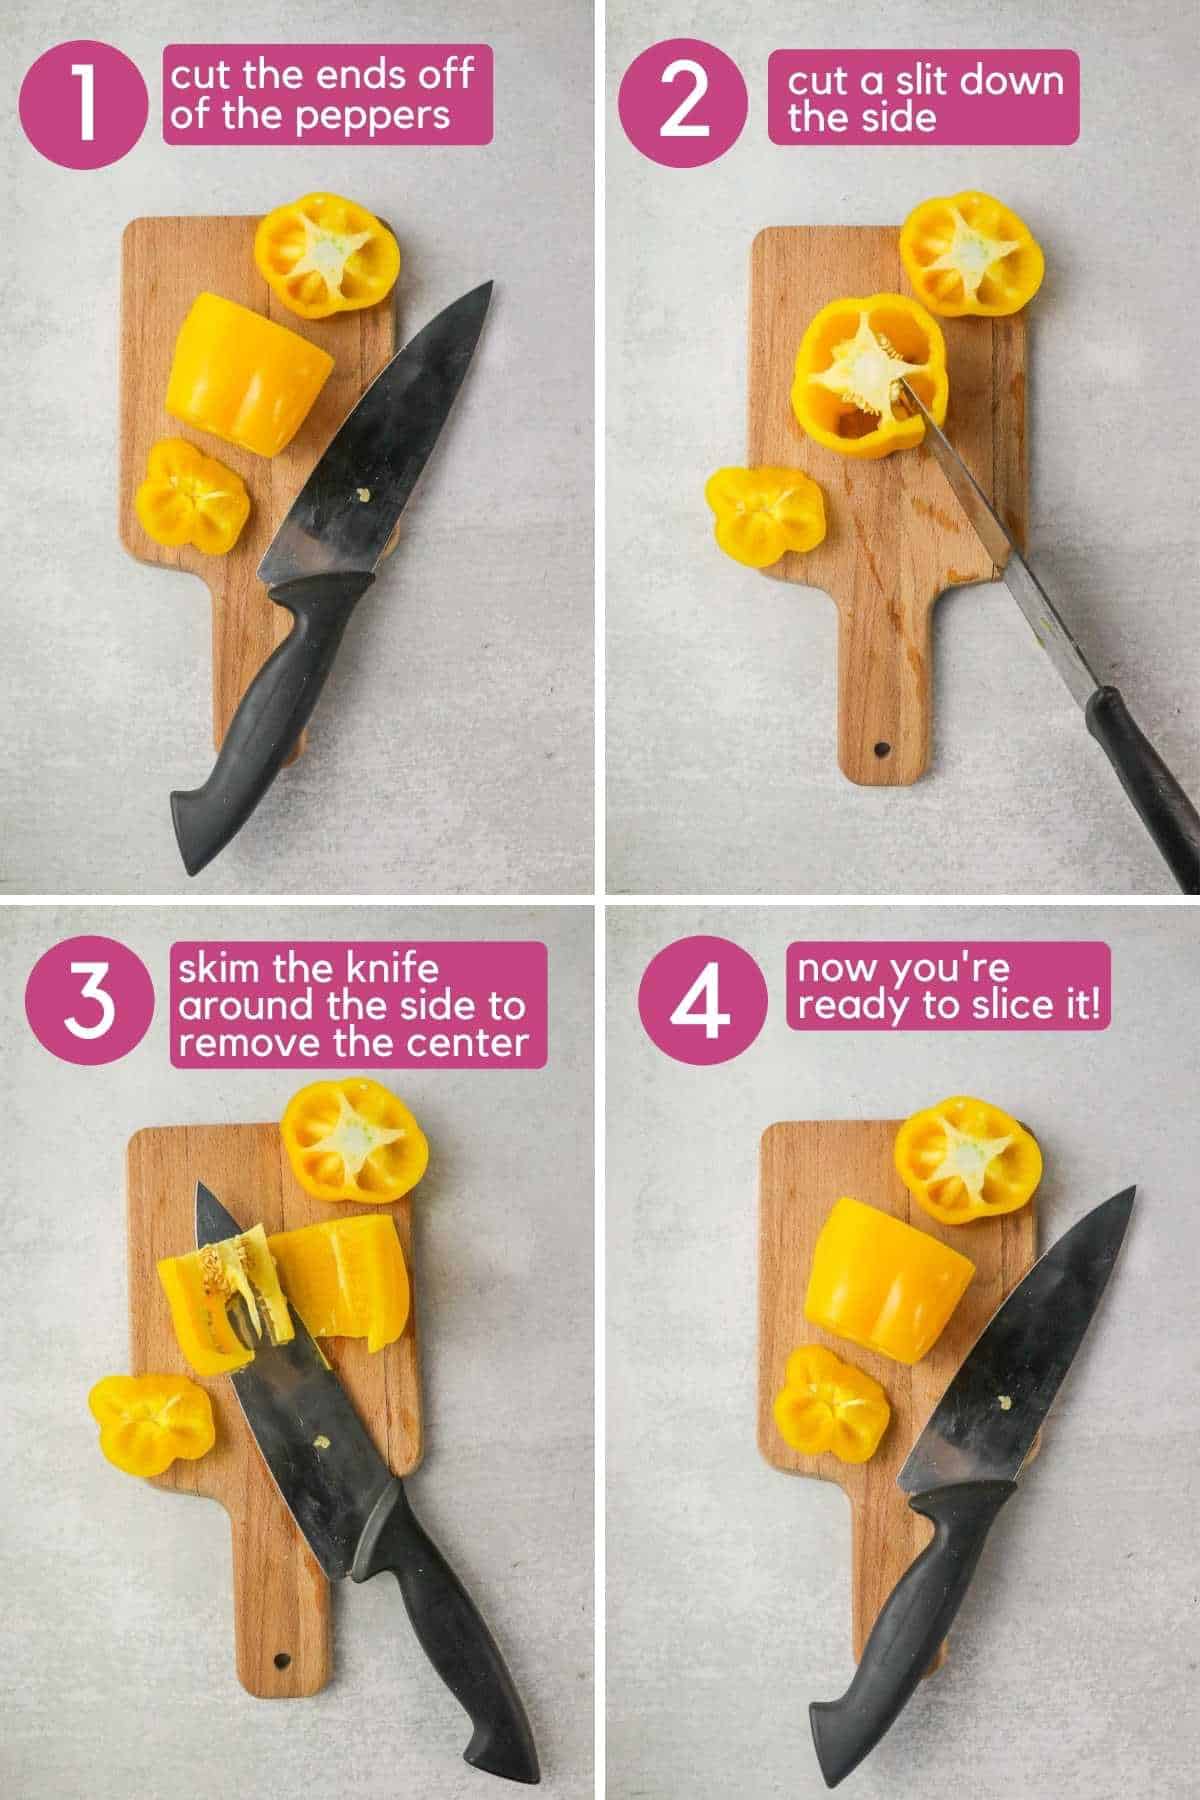 How to cut a bell pepper using a knife.